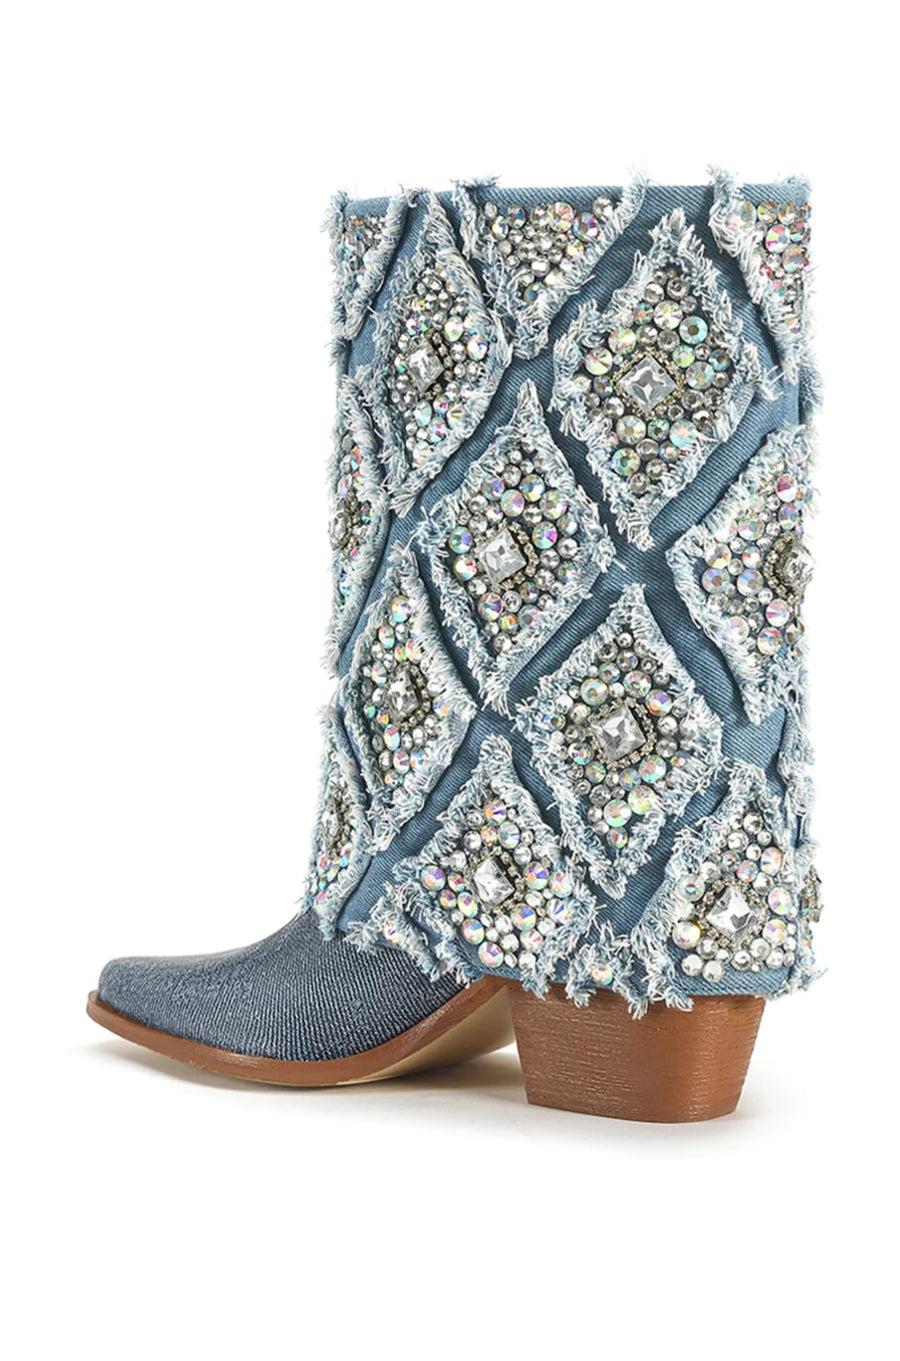 back view of denim statement western boot with a patterned, rhinestone embellished distressed denim  fold over accent 